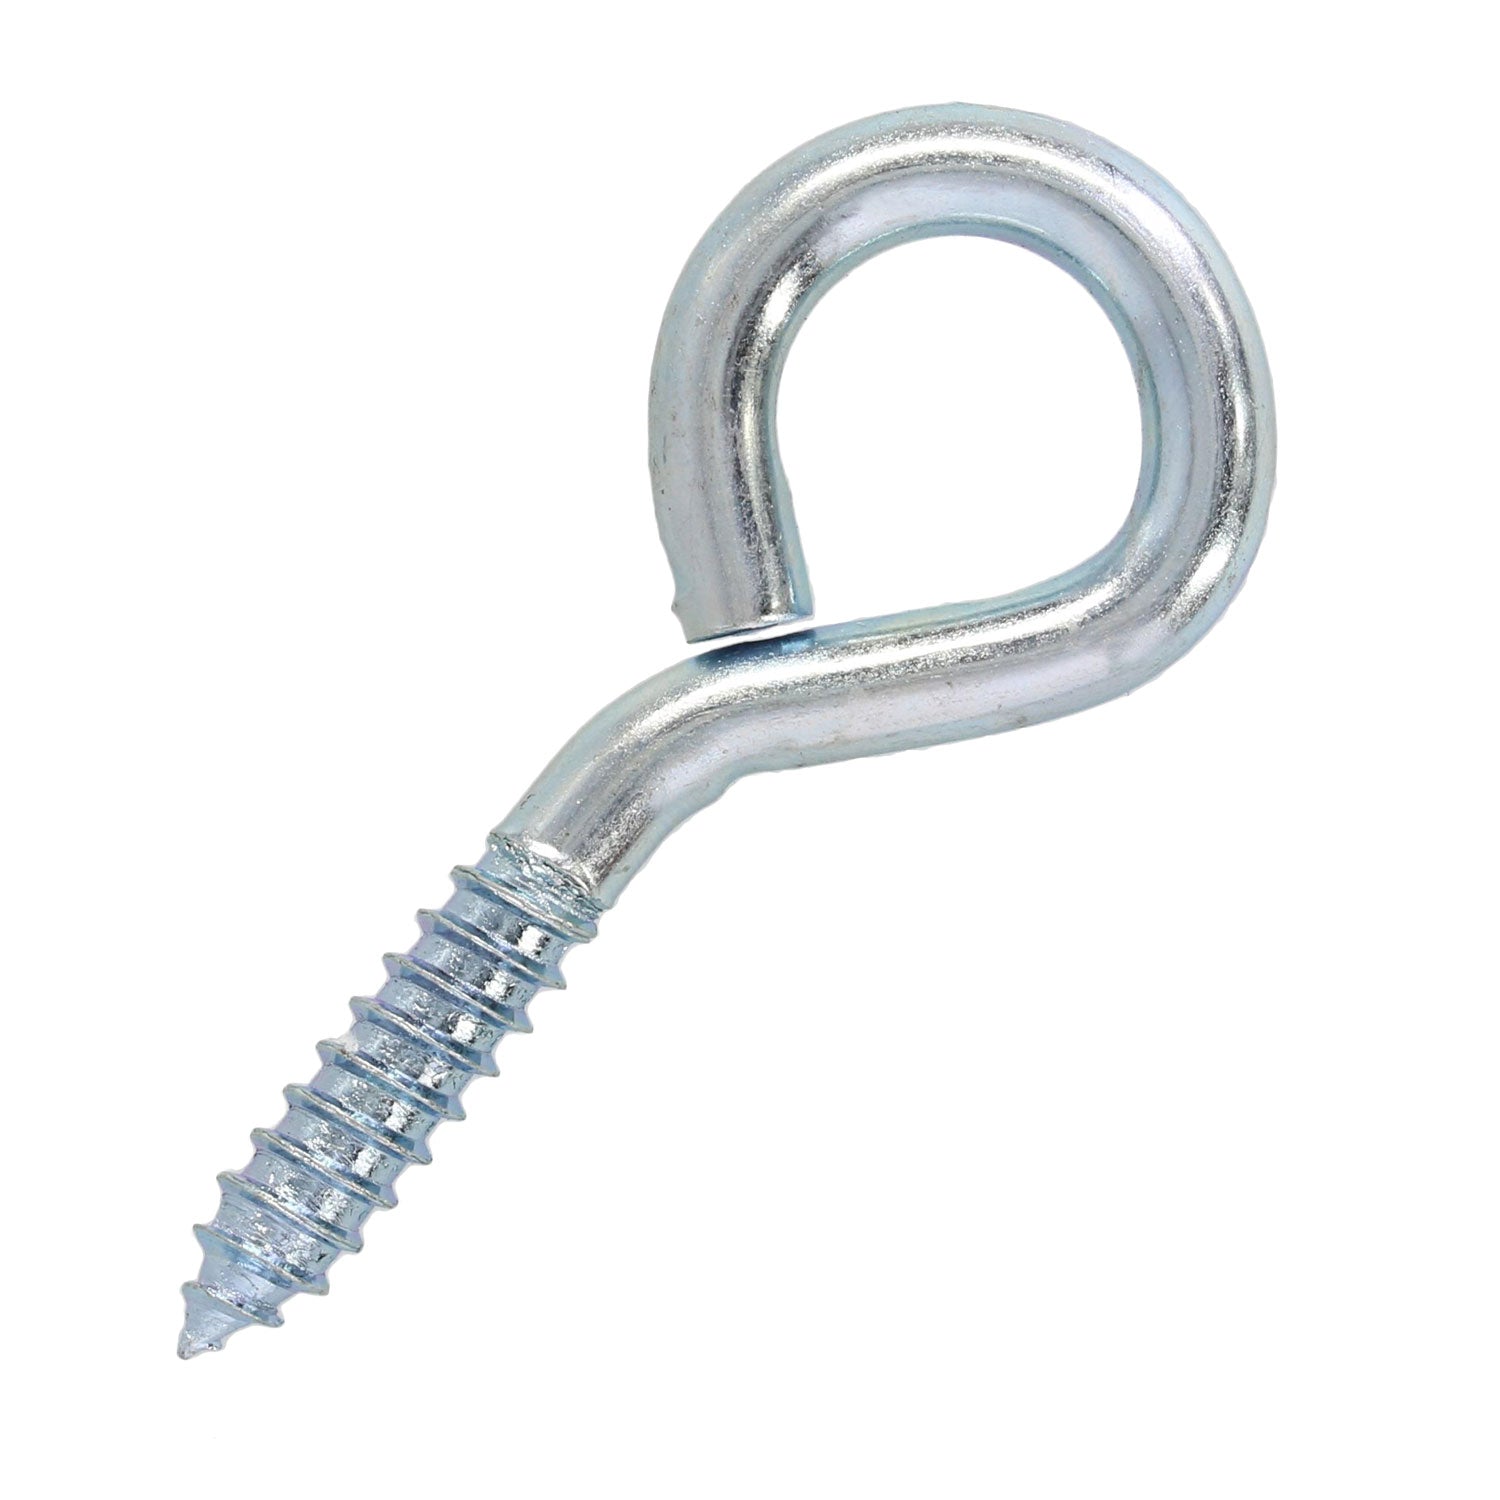 Zinc Plated Formed Lag Eye Bolts